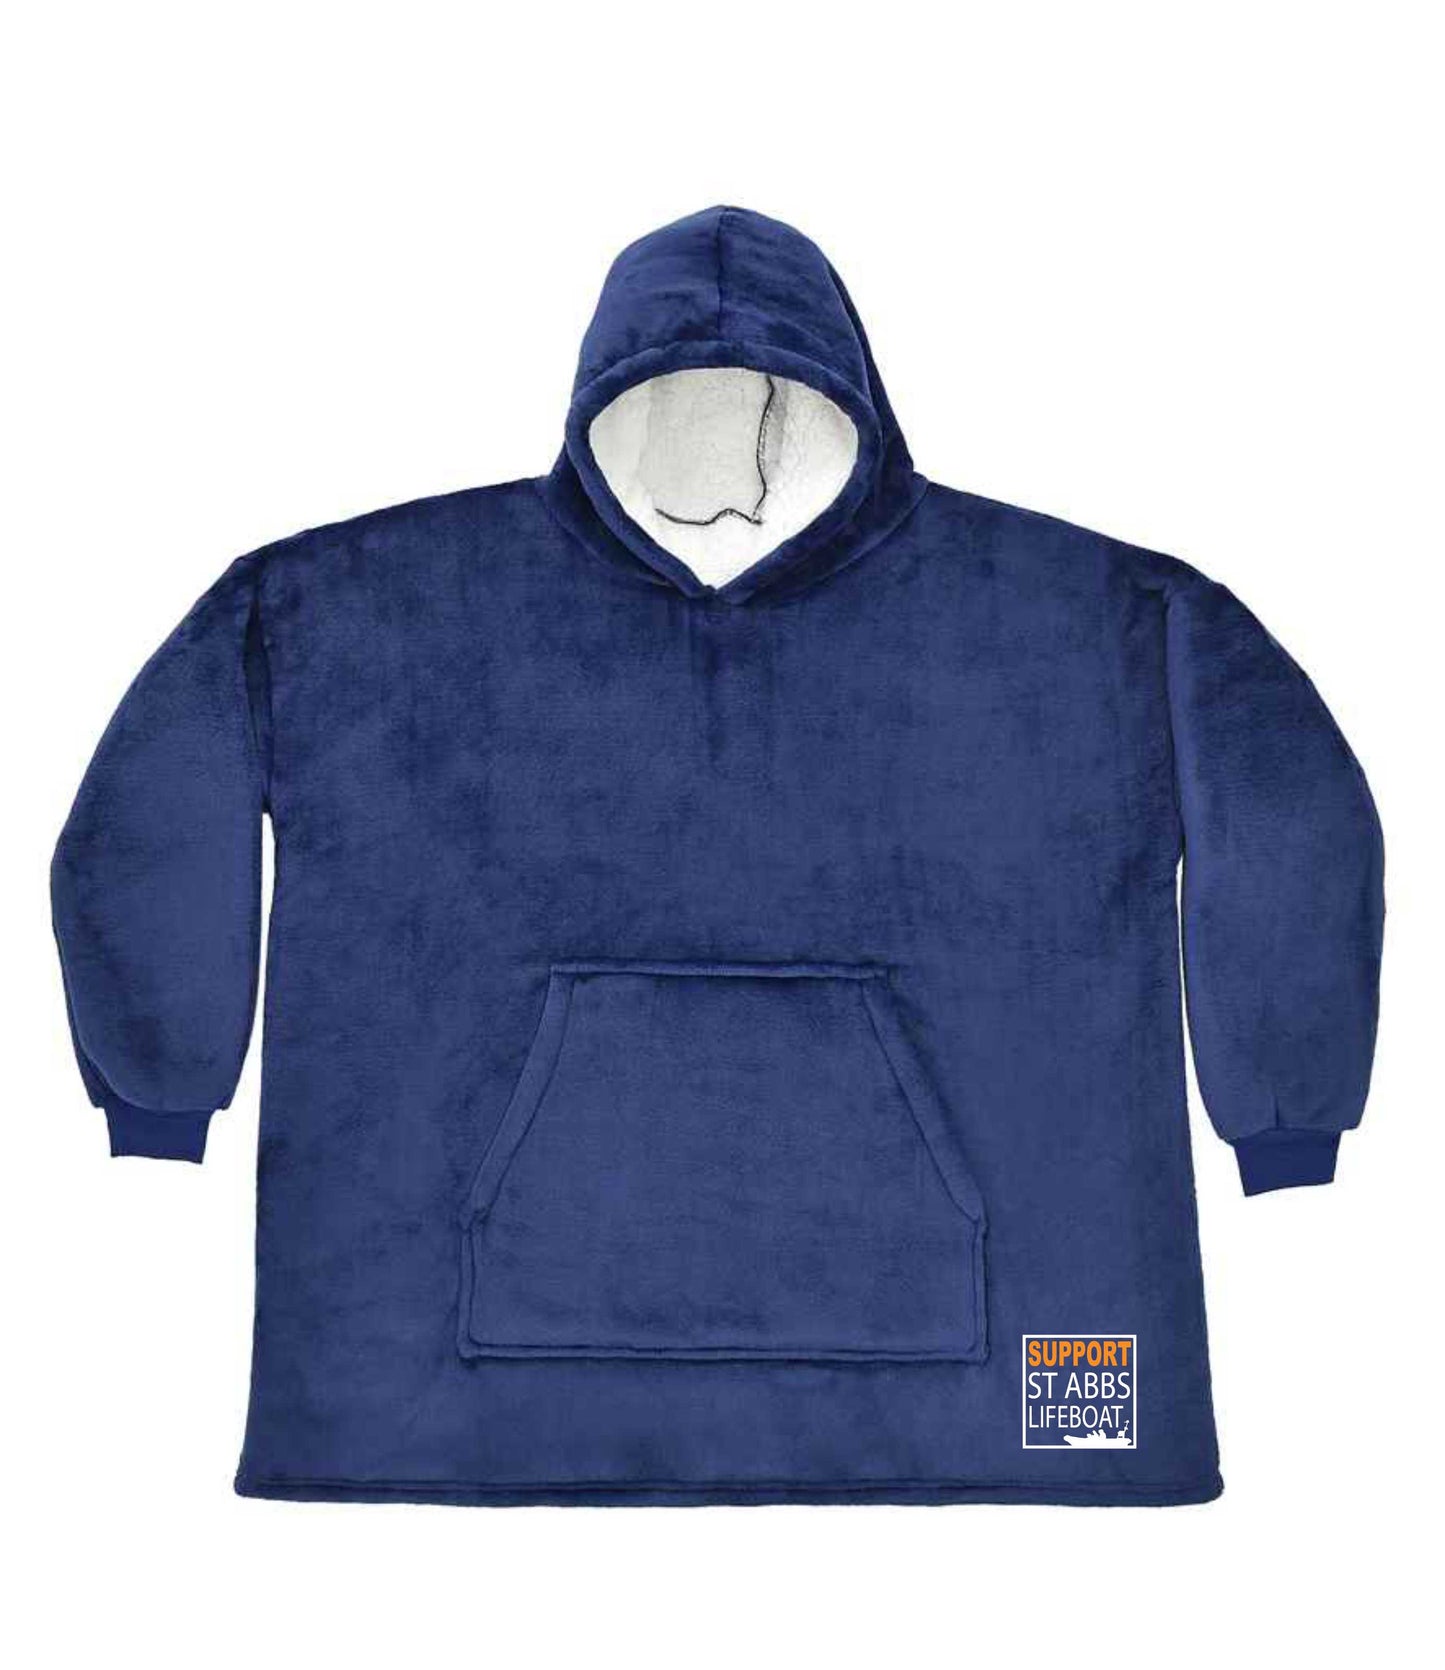 St Abbs Lifeboat Hooded Blanket